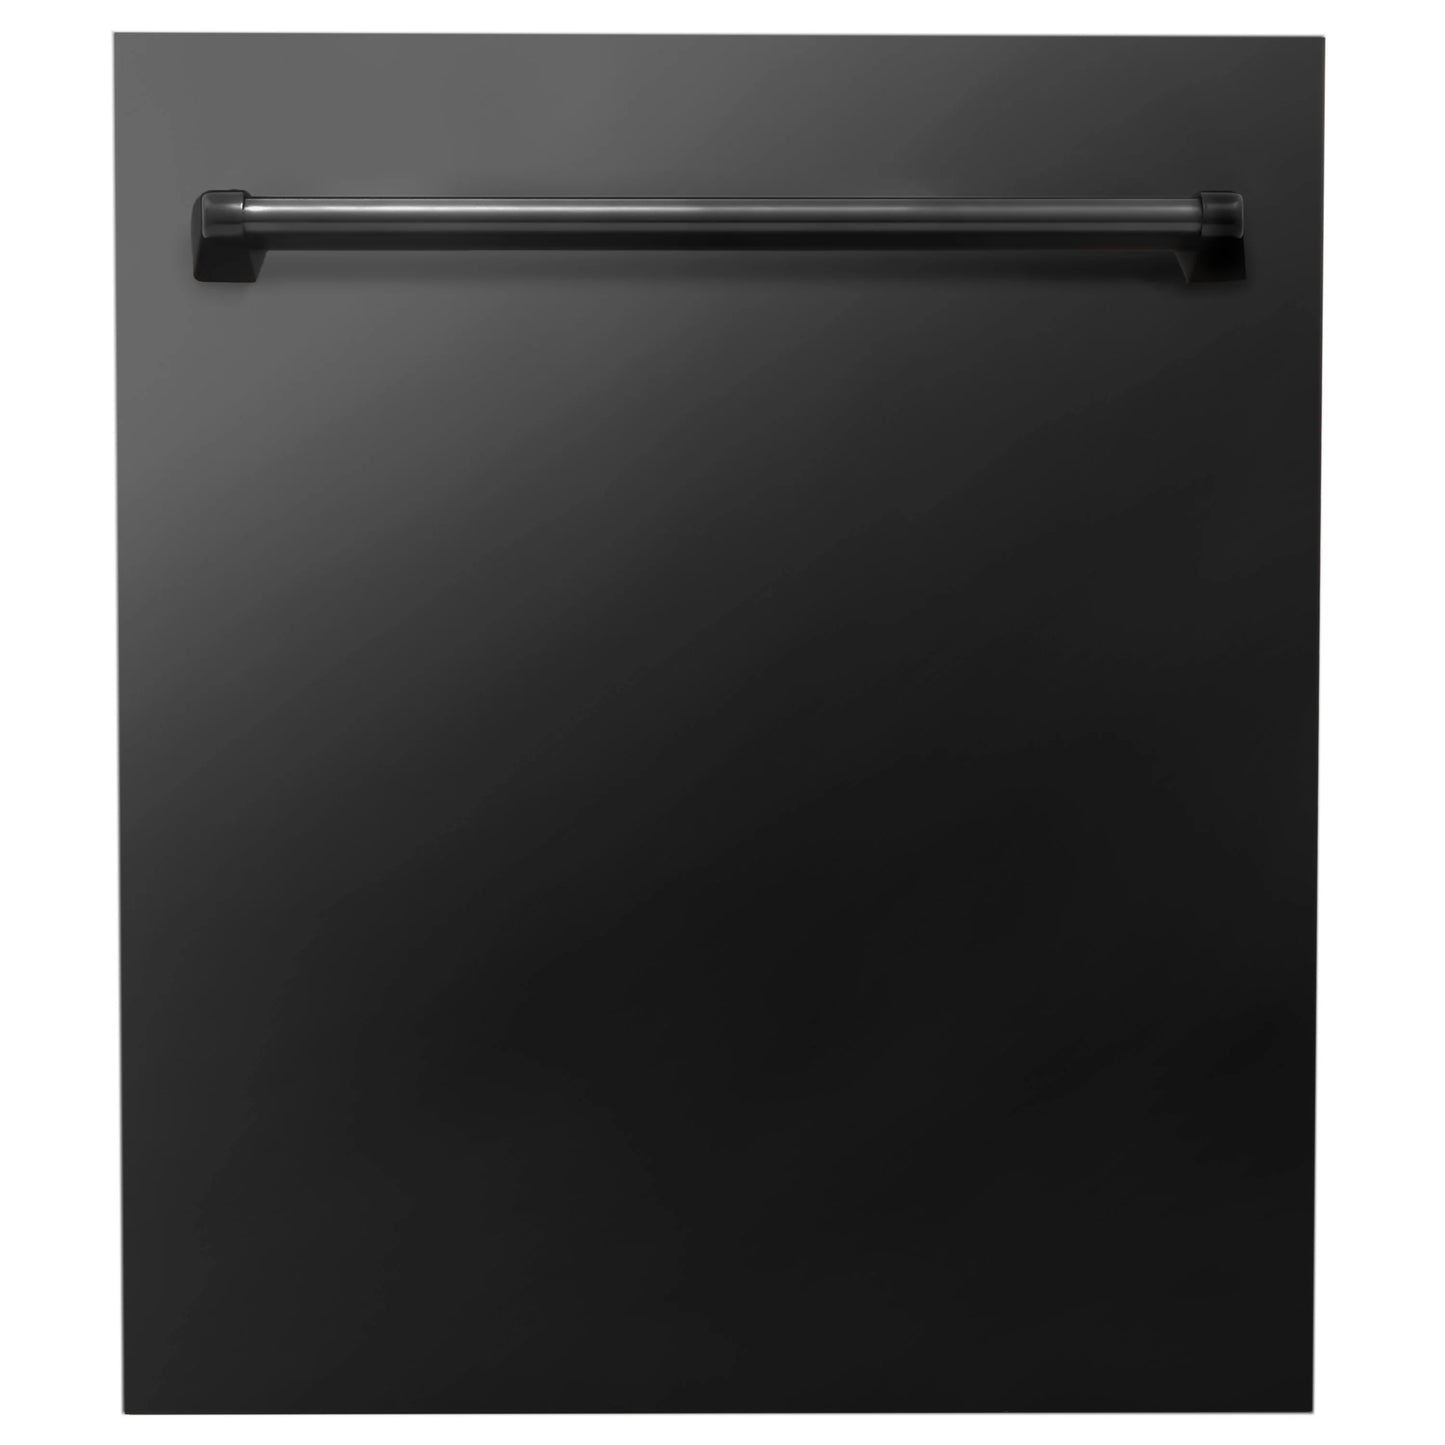 ZLINE 24 in. Top Control Dishwasher in Black Stainless Steel with Traditional Style Handle (DW-BS-24)